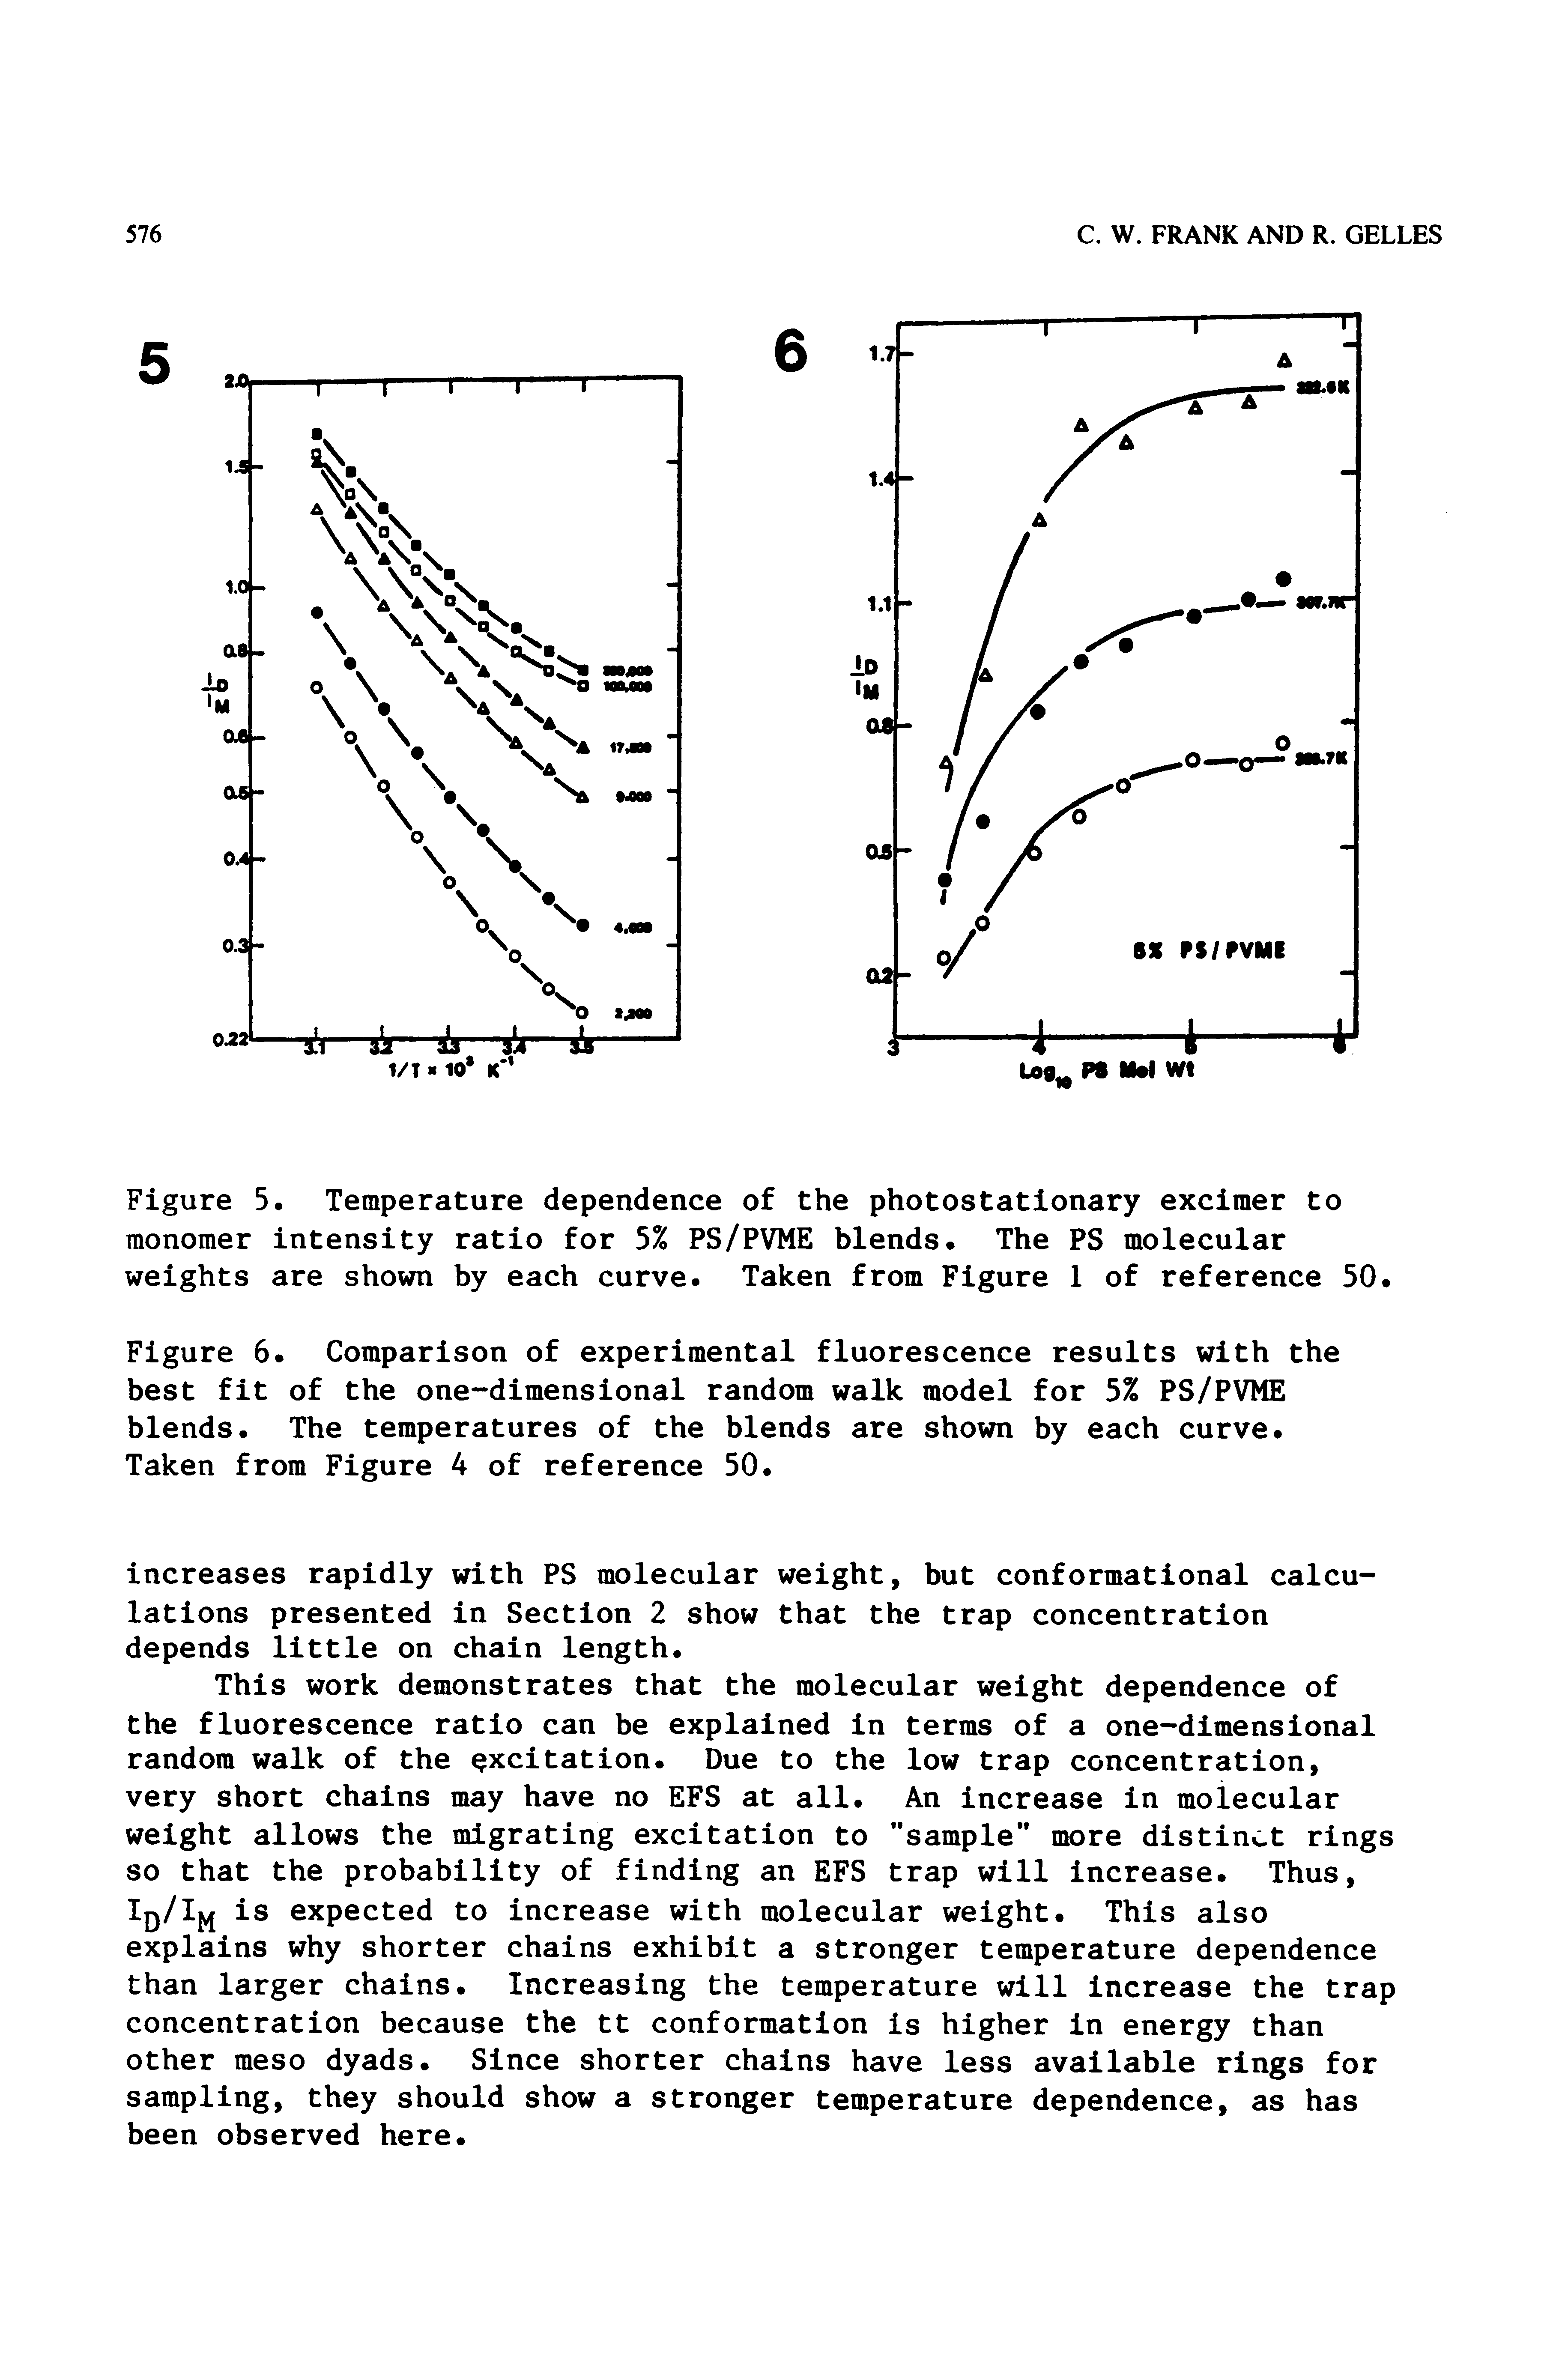 Figure 5. Temperature dependence of the photostationary excimer to monomer intensity ratio for 5% PS/PVME blends. The PS molecular weights are shown by each curve. Taken from Figure 1 of reference 50.